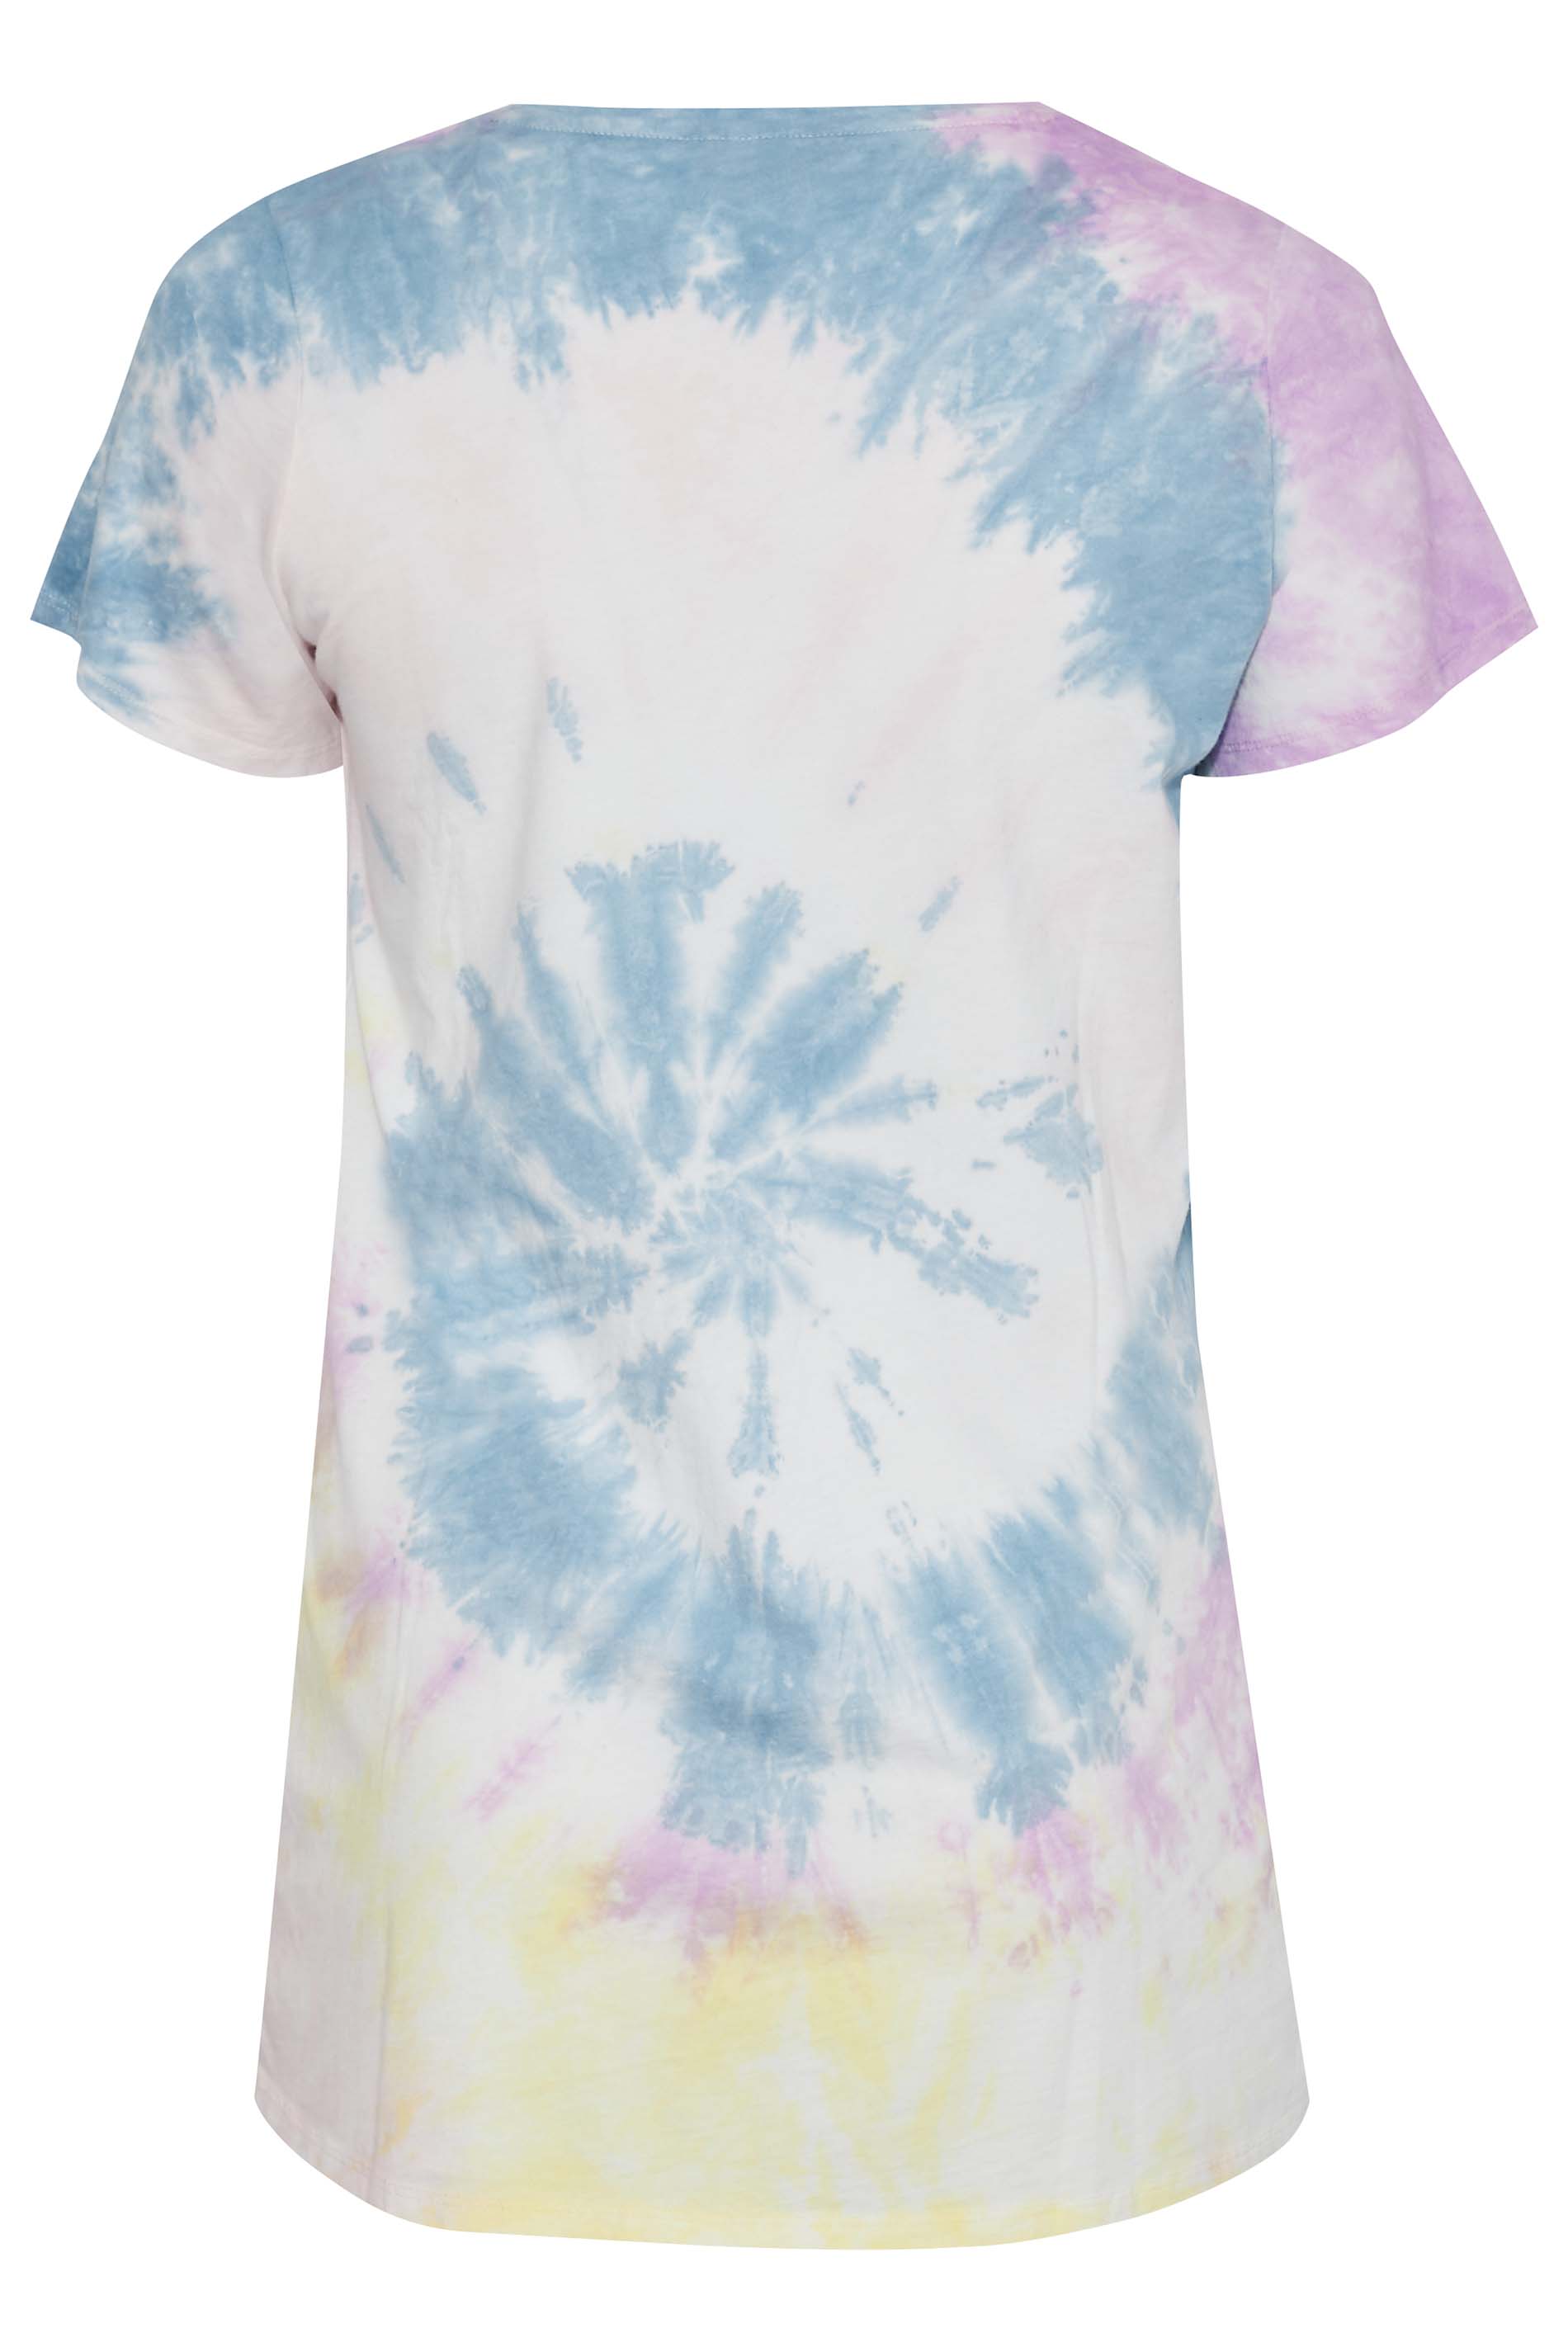 Grande taille  Tops Grande taille  T-Shirts | Curve White Tie Dye Cotton T-Shirt - XP25025